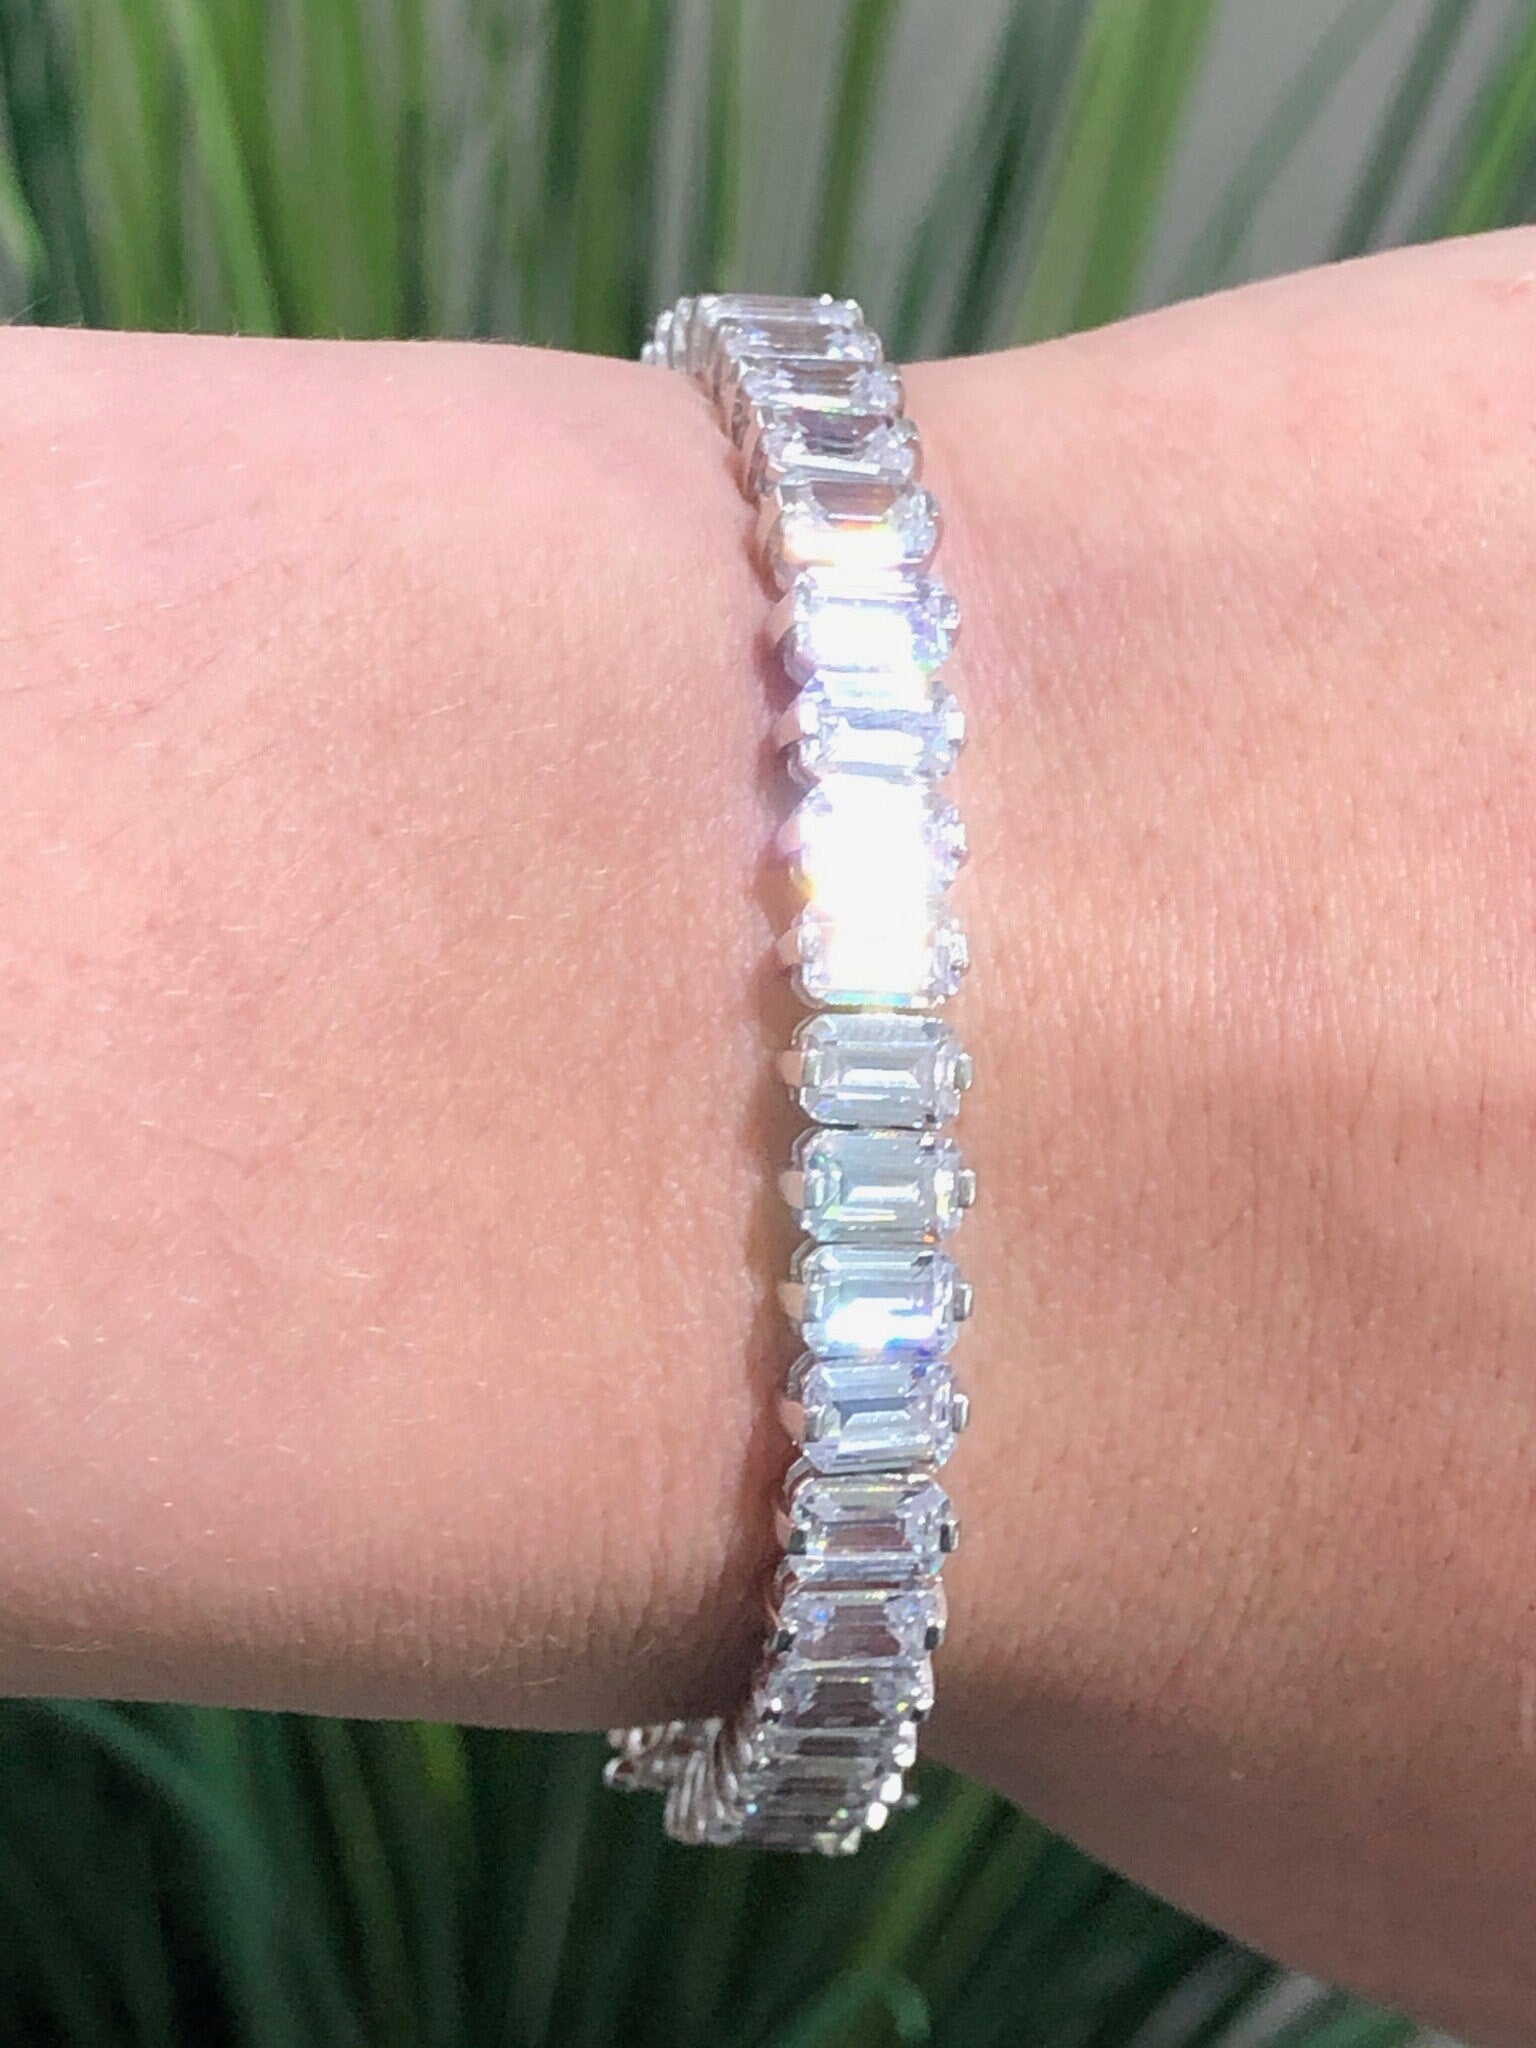 LIV Platinum over Sterling Silver Emerald Cut Tennis Bracelet With Hand Set Simulated Diamonds Bridal Travel Very Sparkly!